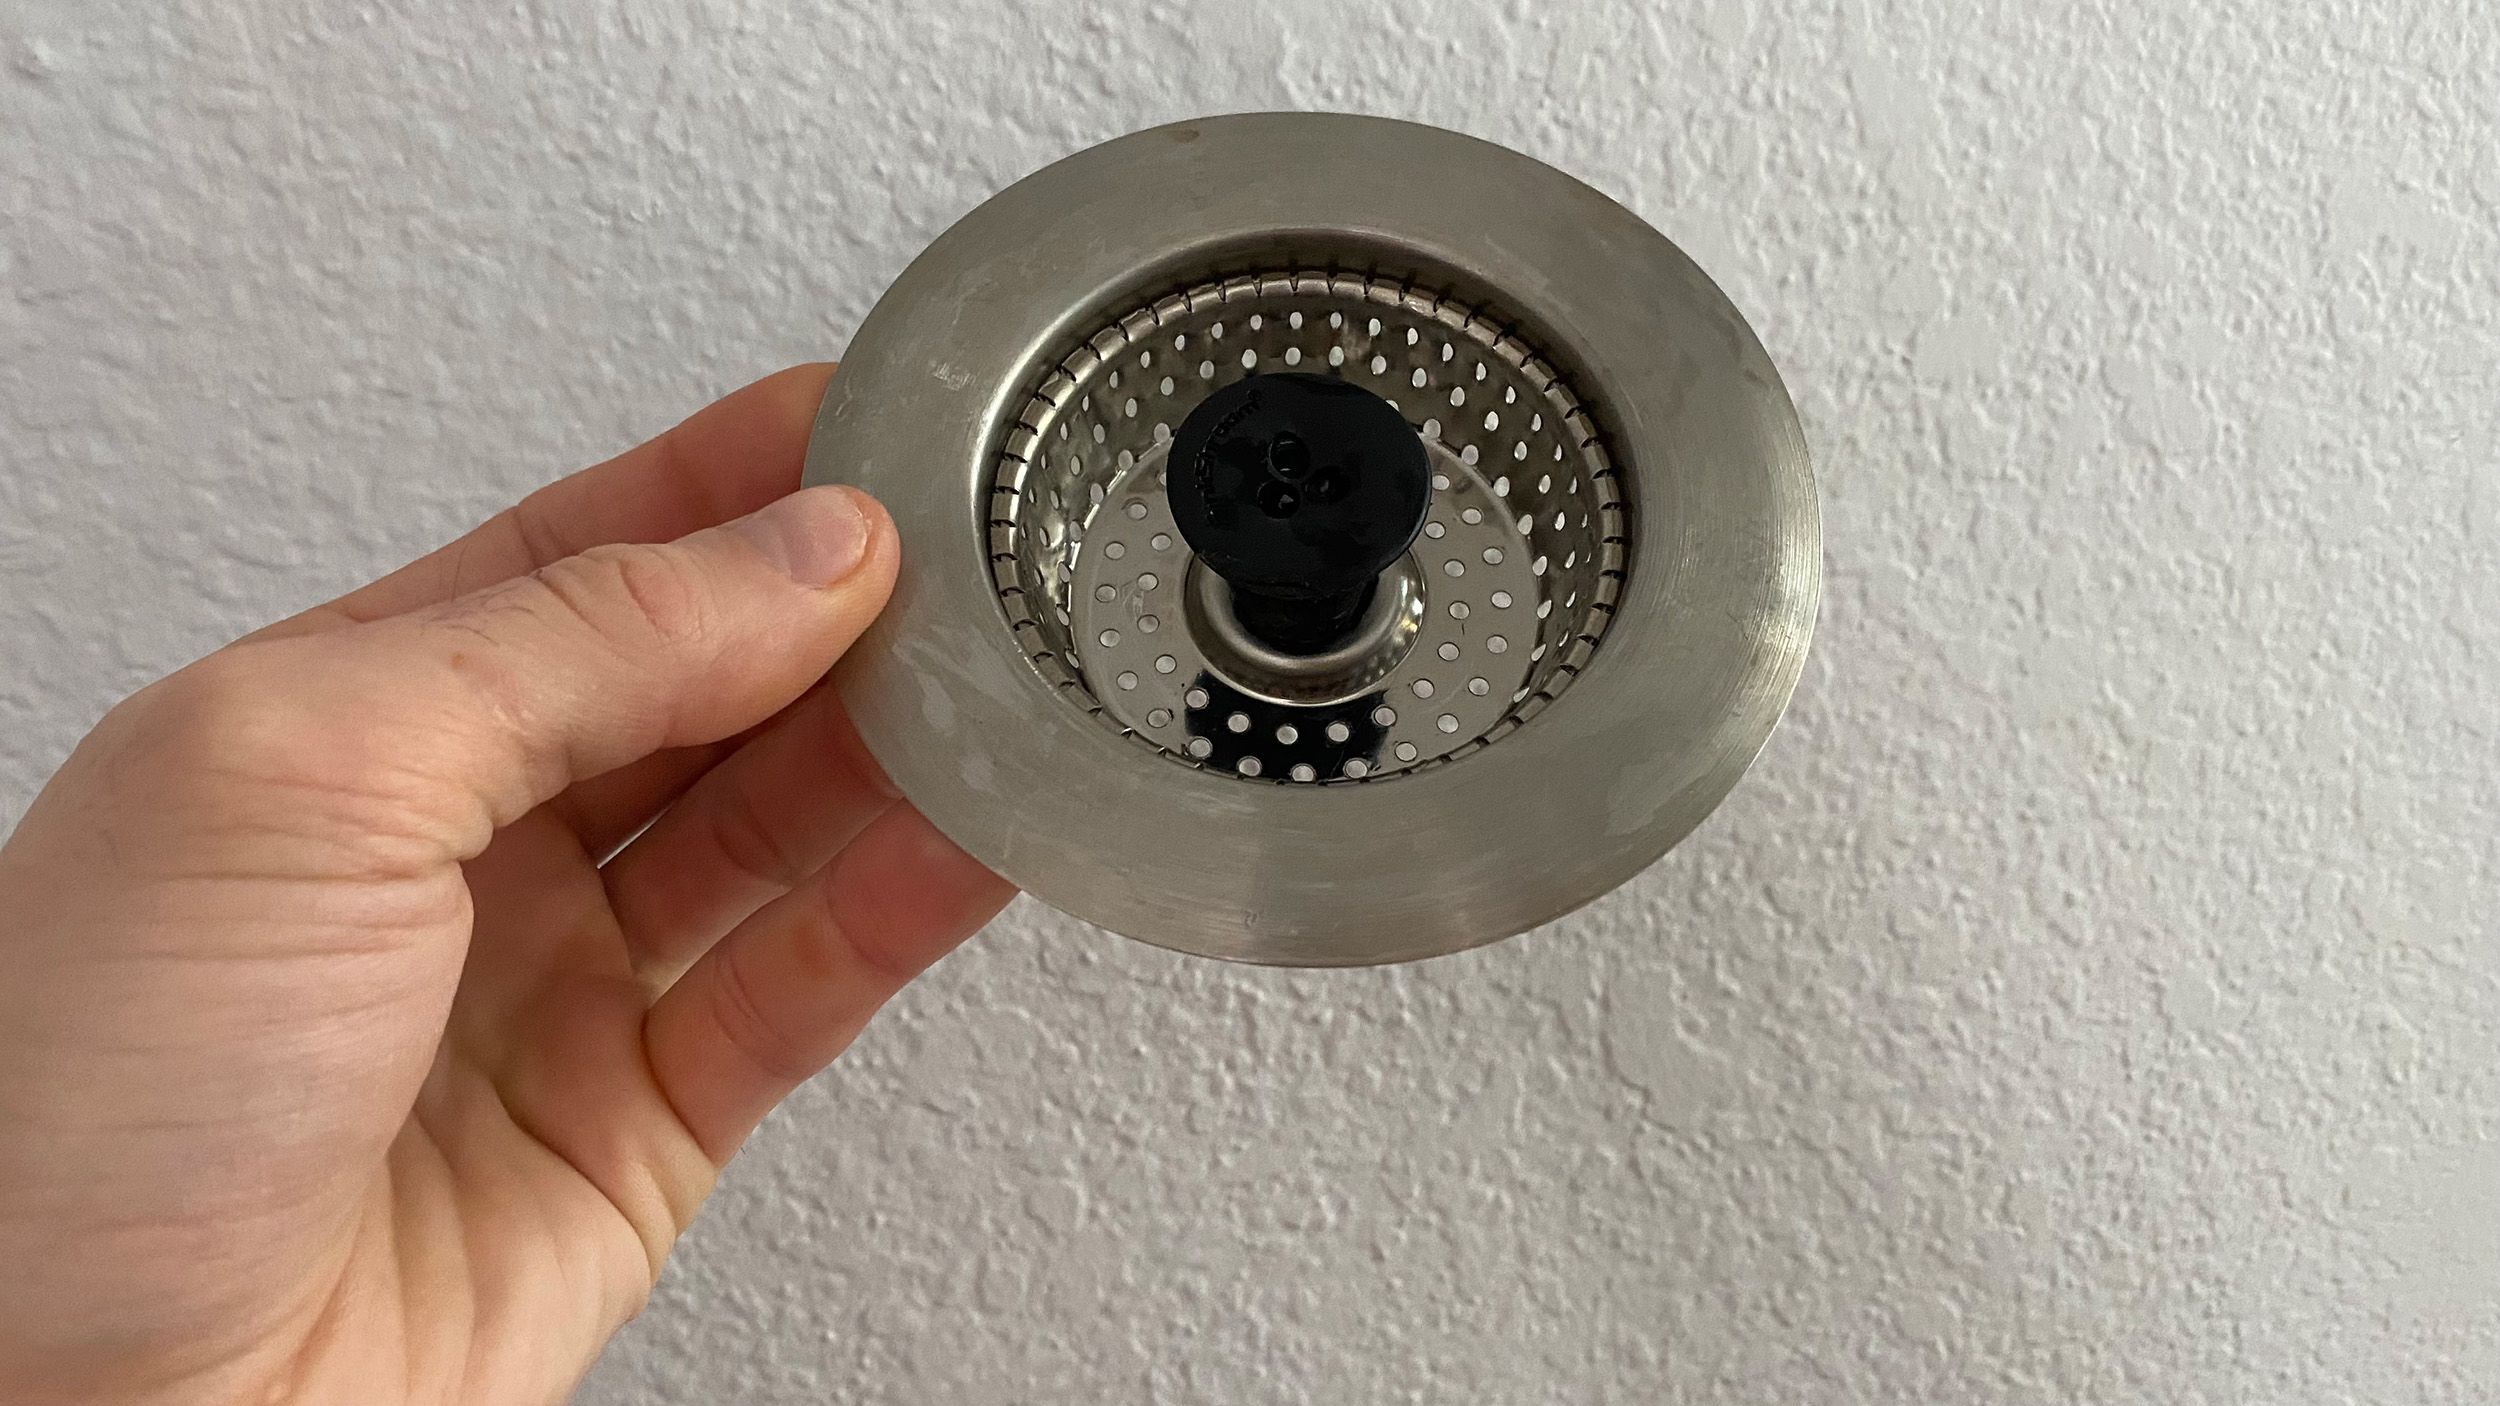 TubShroom Review: Why You Might Actually Want to Buy This As Seen on TV”  Drain Hair Catcher